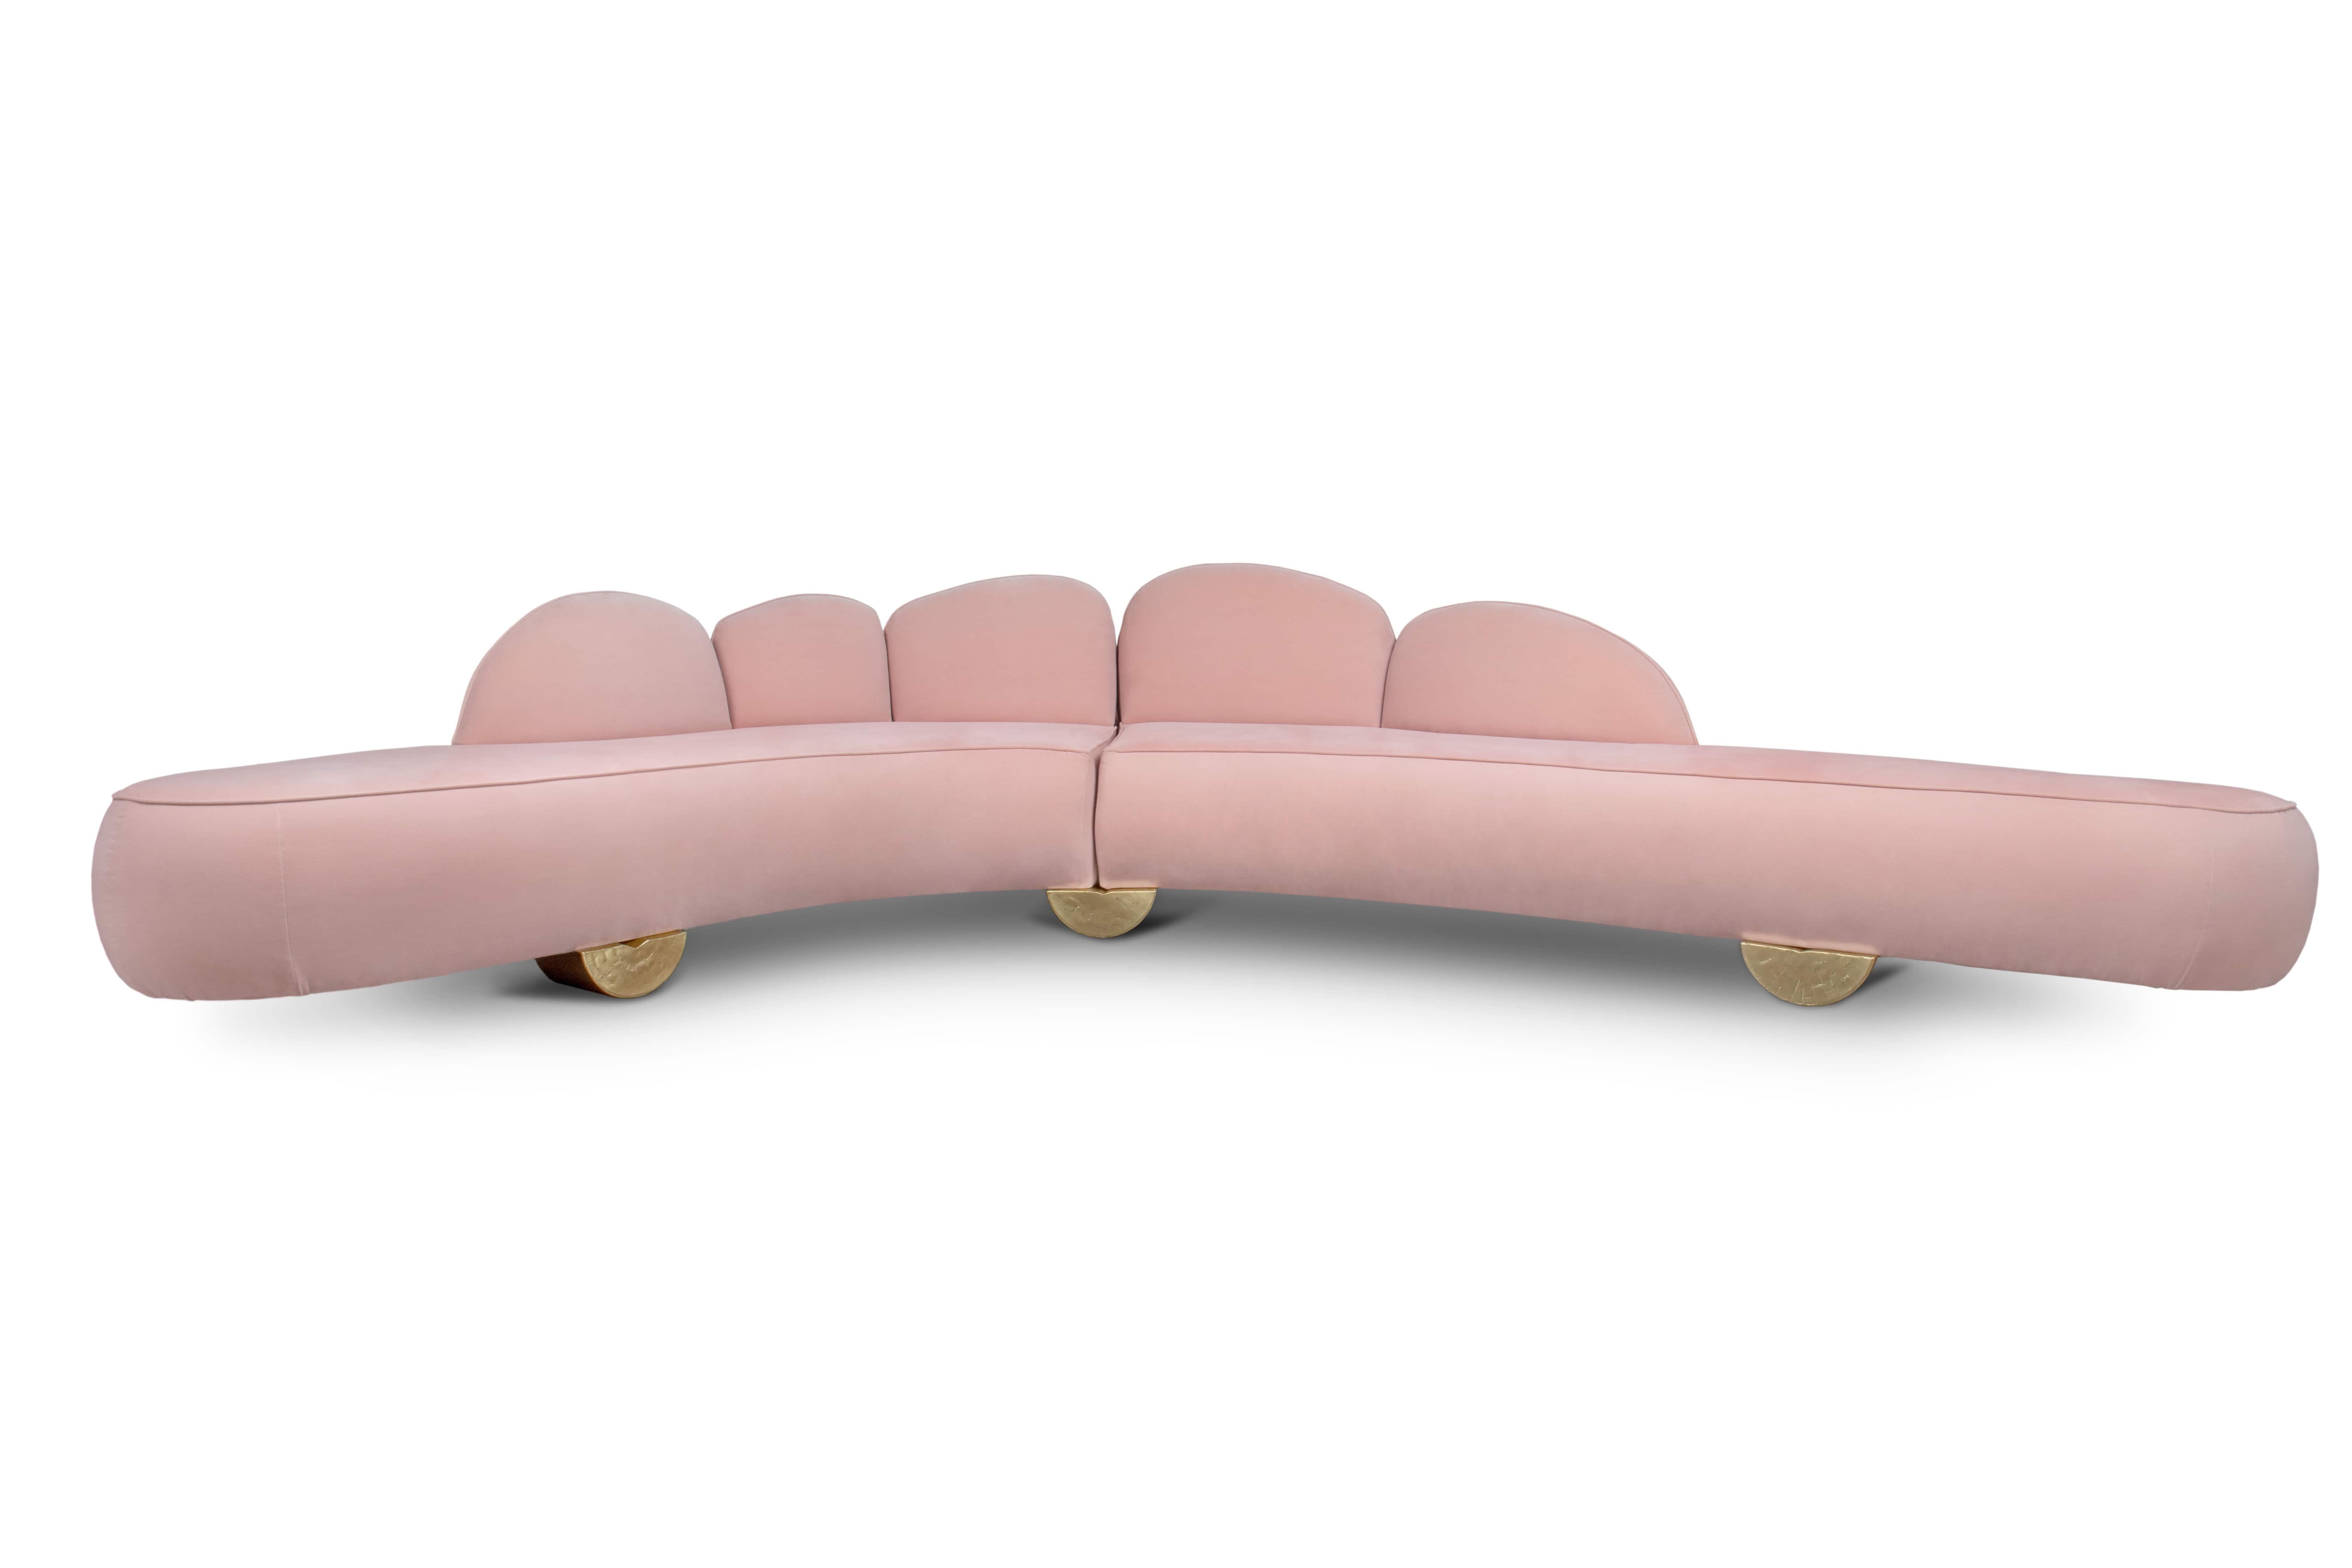 Fitzroy sofa is inspired in Mount Fitz Roy, a mountain in Patagonia, whose name is a tribute to Robert FitzRoy, the captain of the ship that transported Charles Darwin in his travel around the world. This curved sofa, with its back inspired in the